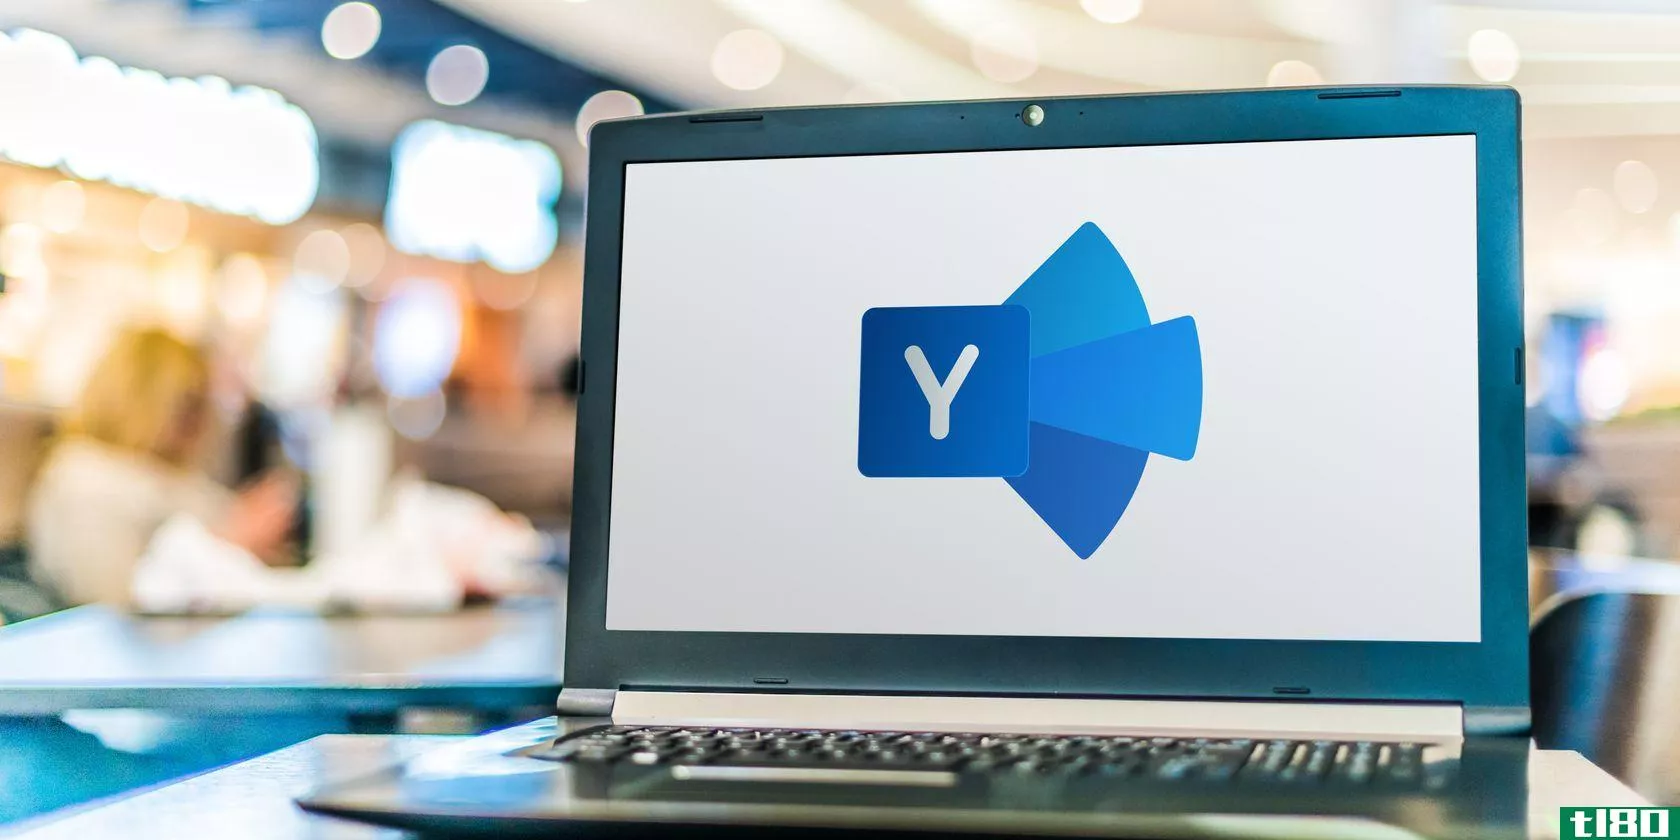 A laptop showing Yammer